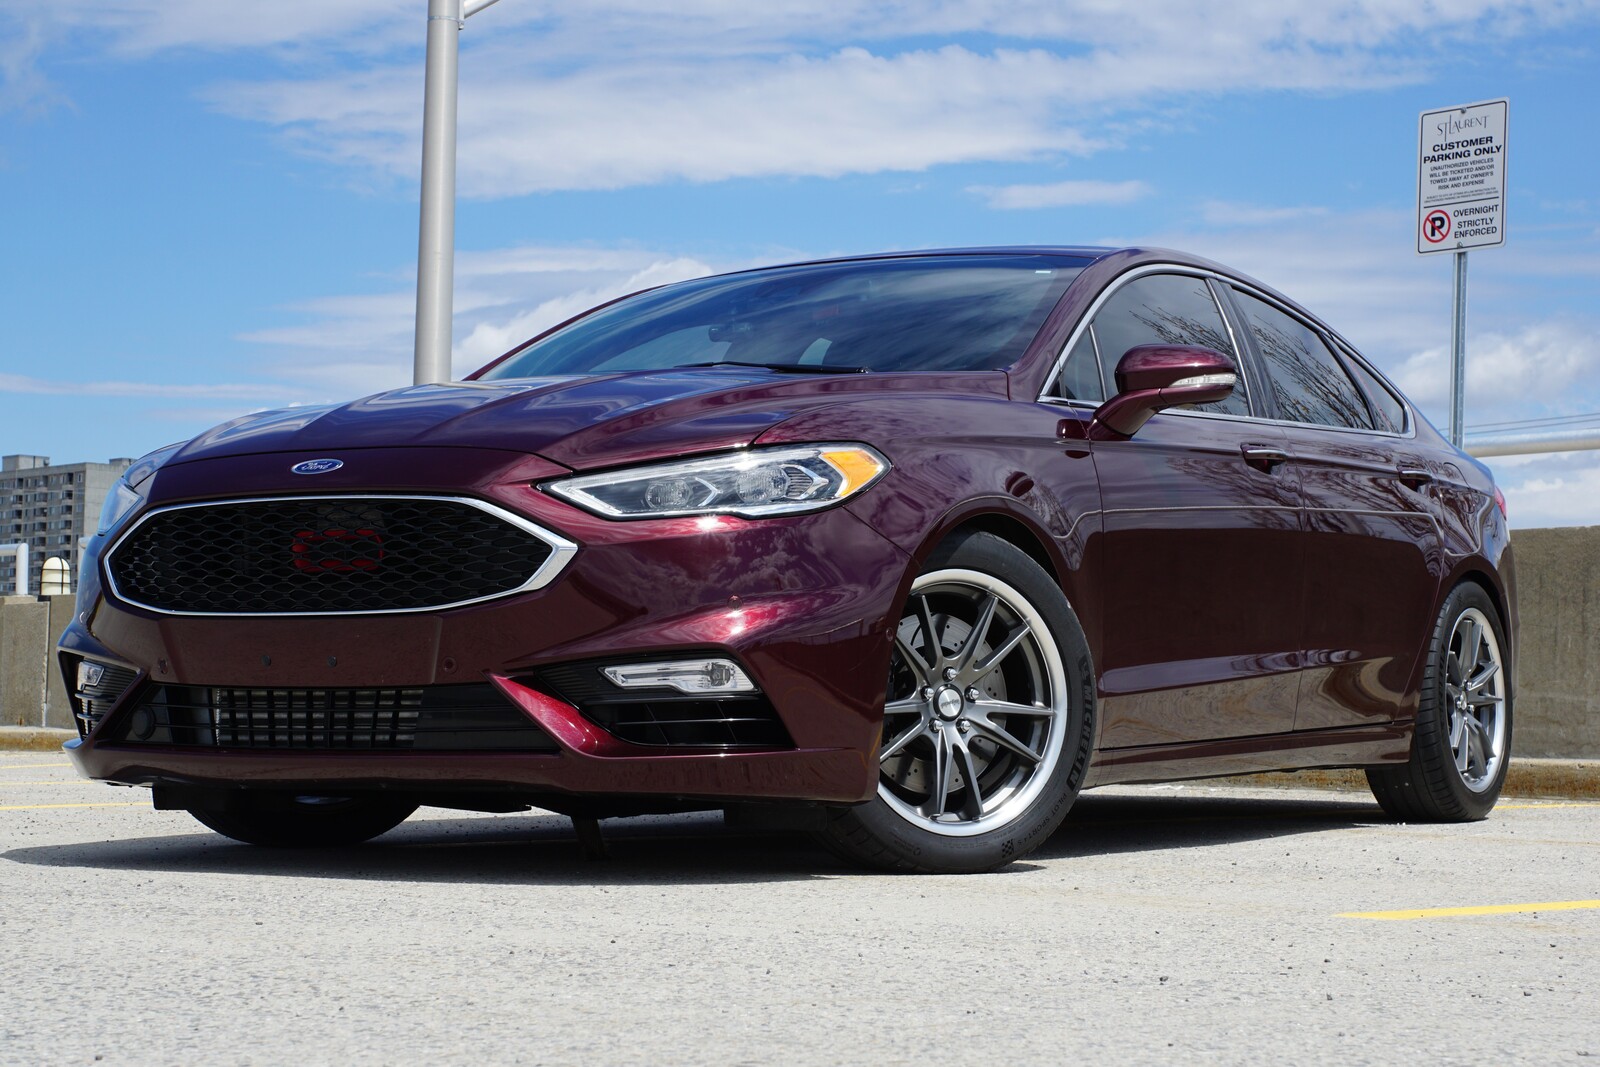 2017 Ford Fusion Sport 1/4 mile Drag Racing timeslip specs